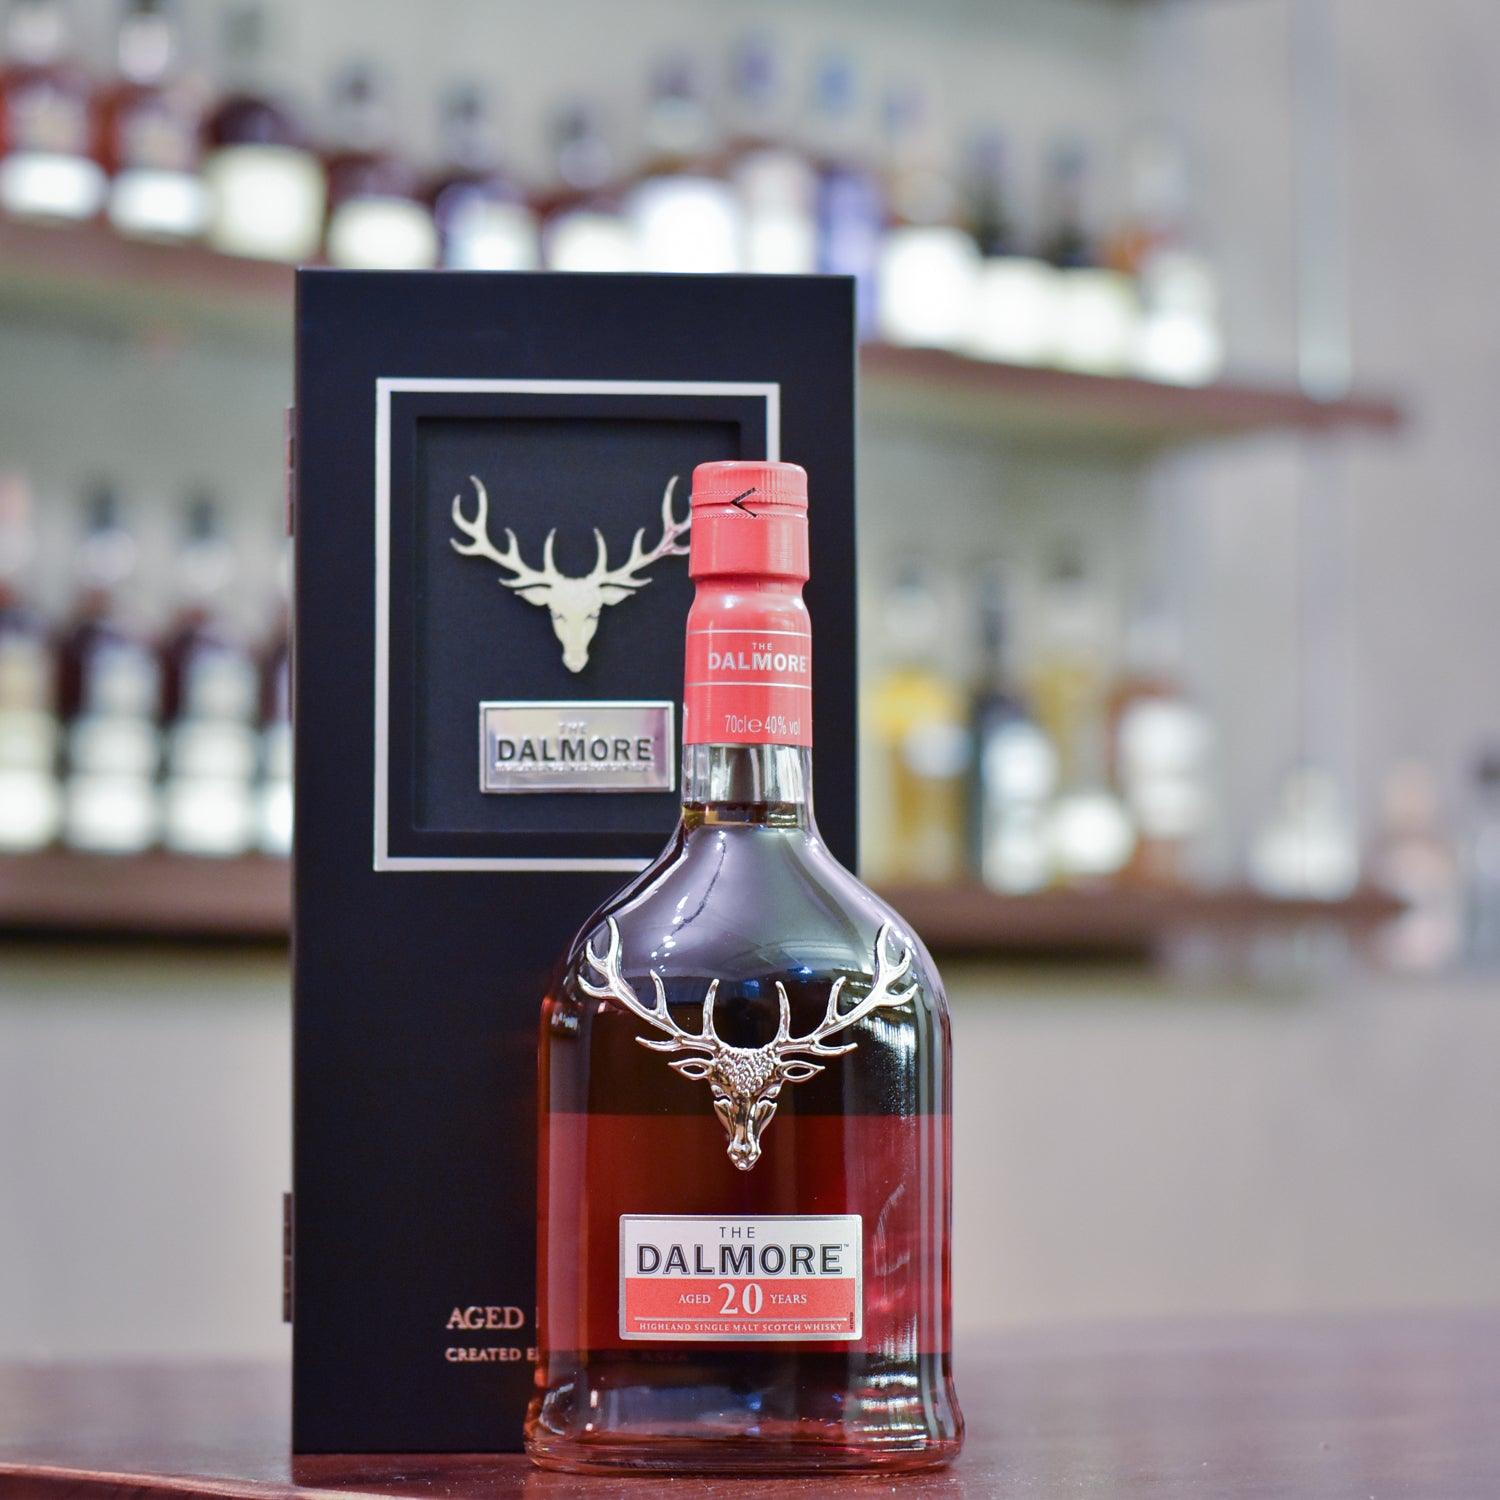 Dalmore 20 Year Old Asia Exclusive 2020 Release - The Rare Malt